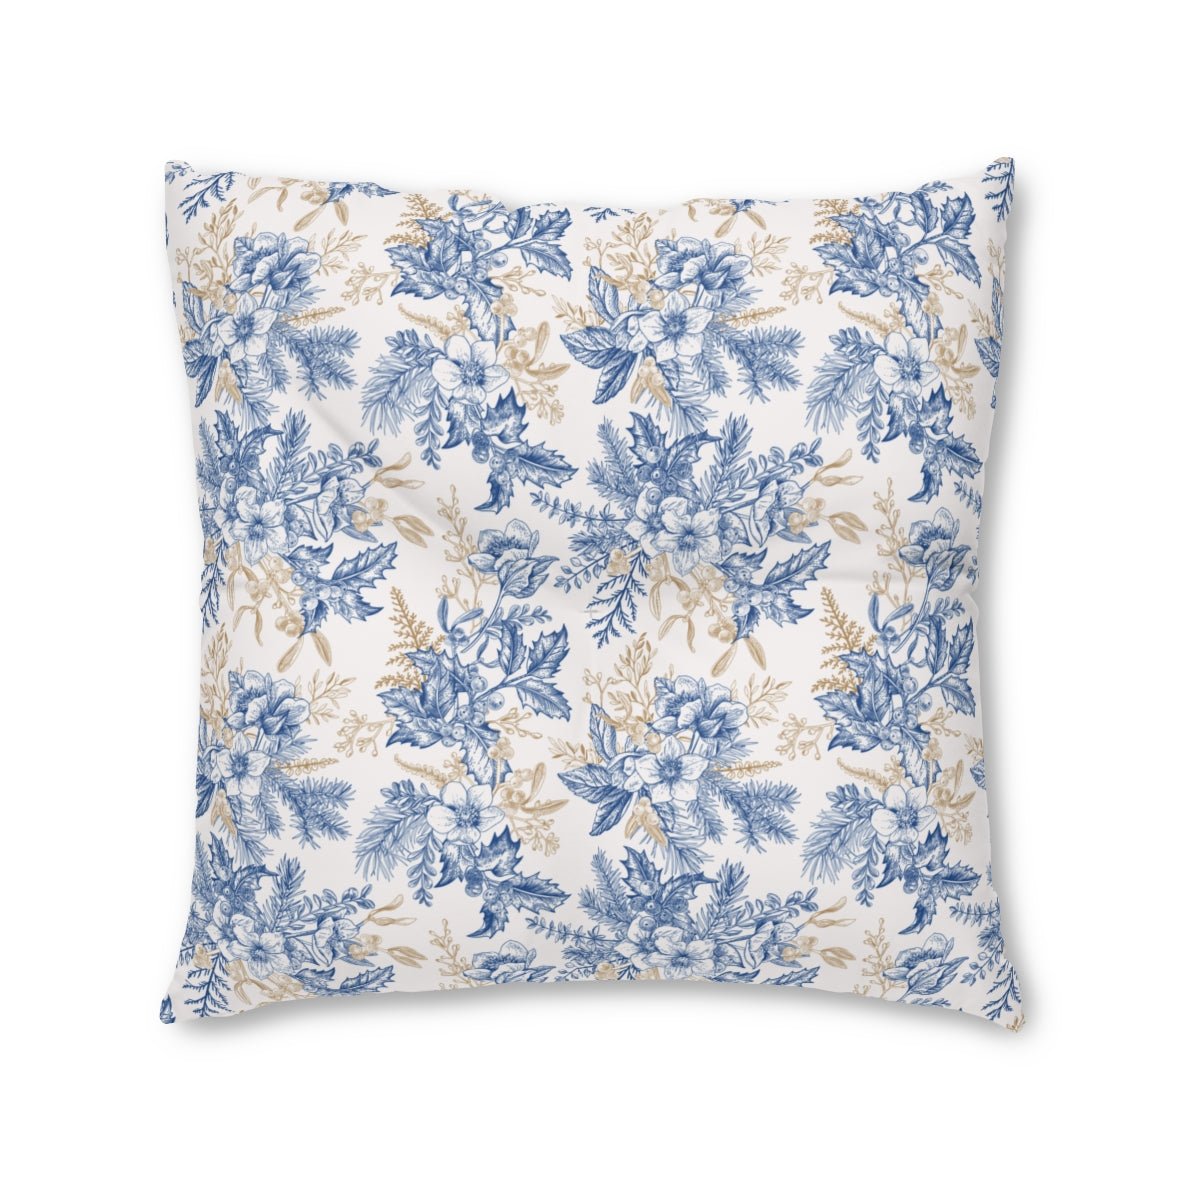 Winter Hellebore Flowers Square Tufted Floor Pillow - Puffin Lime